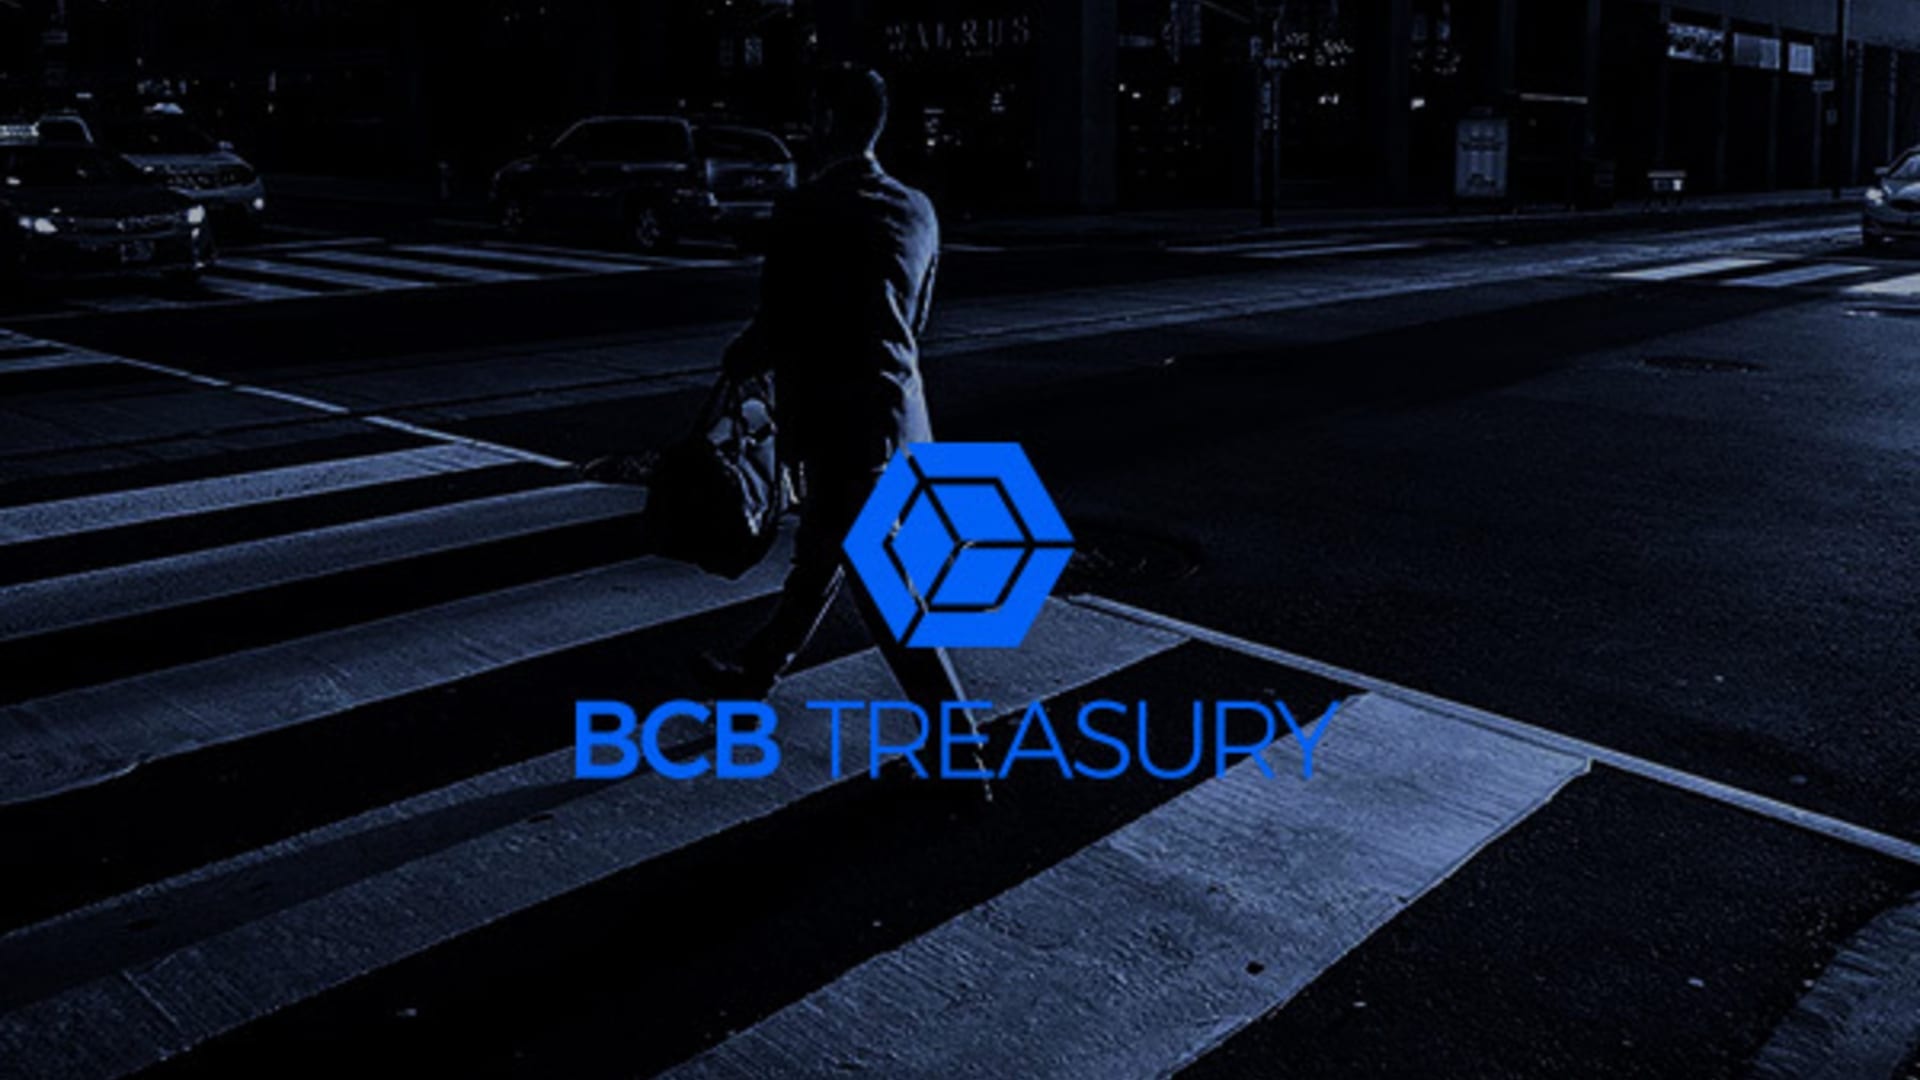 BCB Group Launches Treasury Service to Help Corporations Navigate Digital Assets